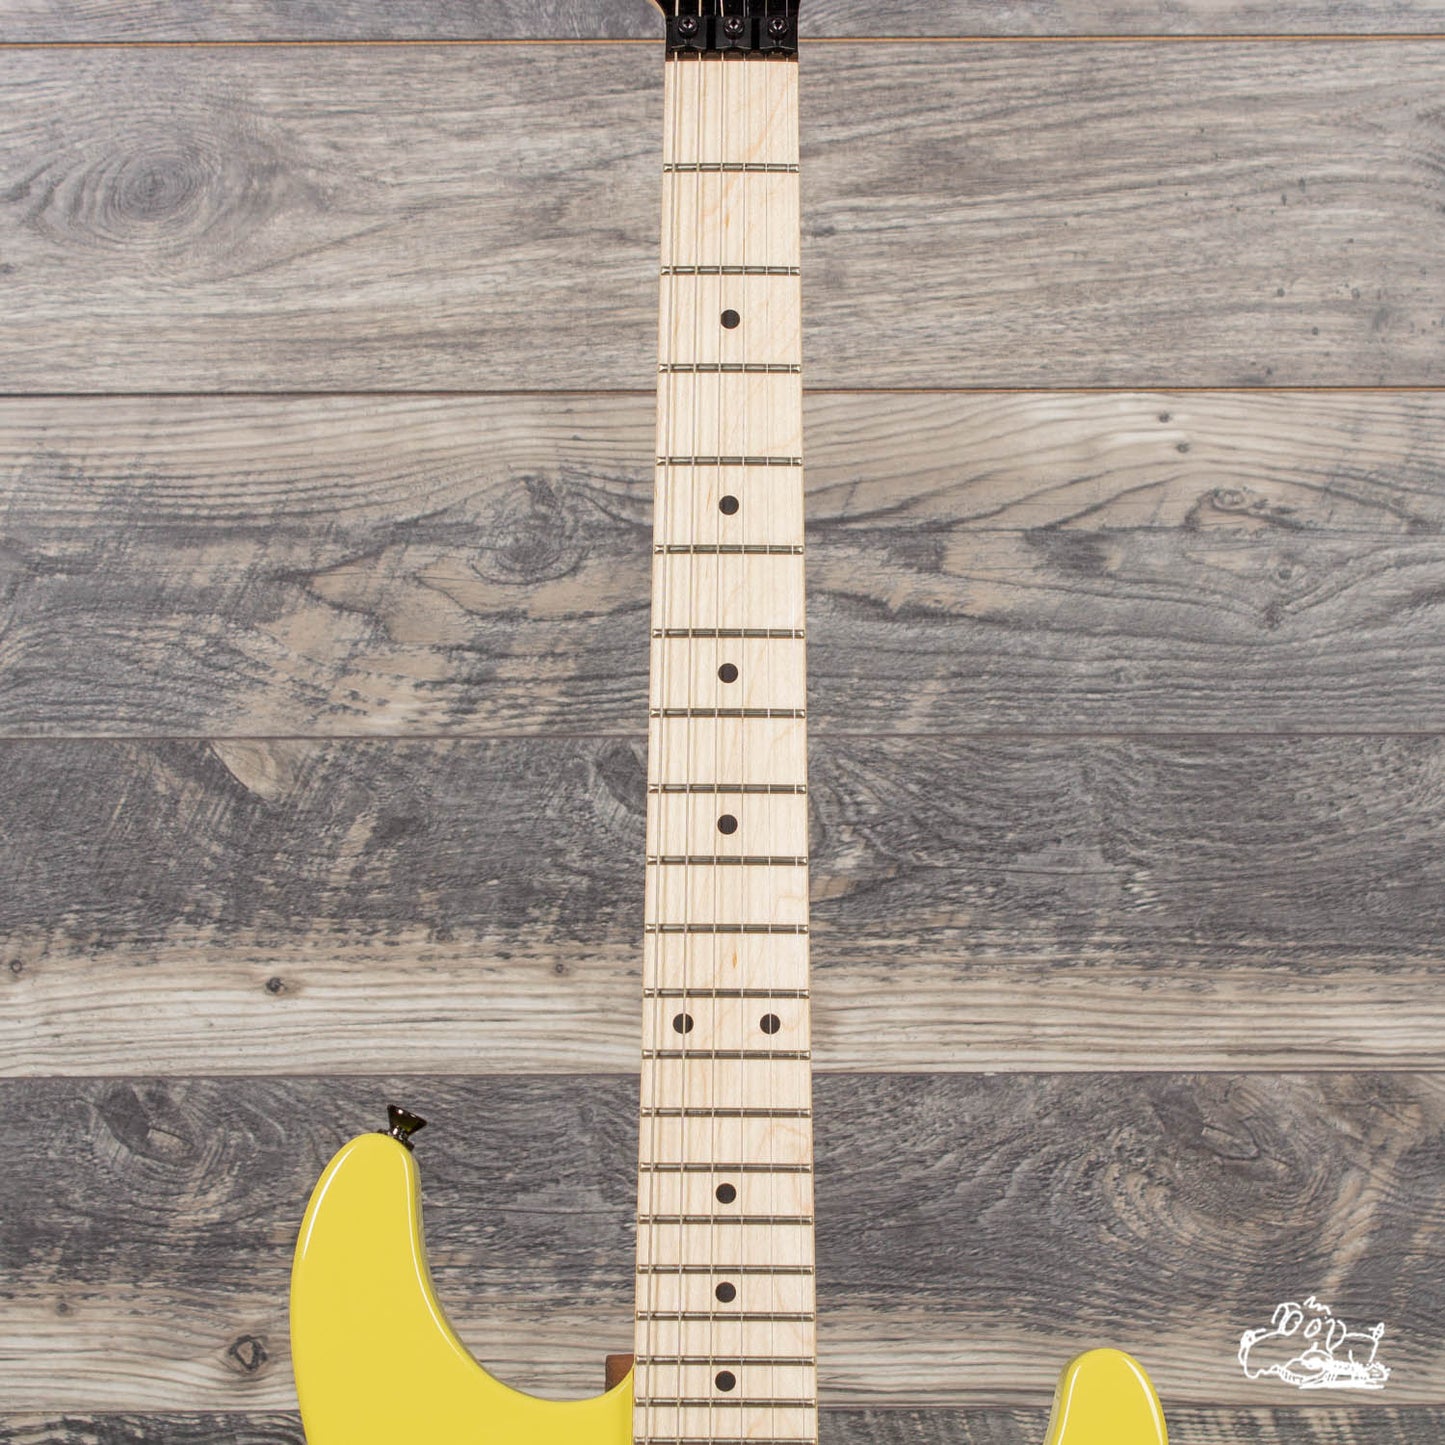 2019 Limited Edition HM Strat®, Maple Fingerboard, Frozen Yellow - Make an Offer